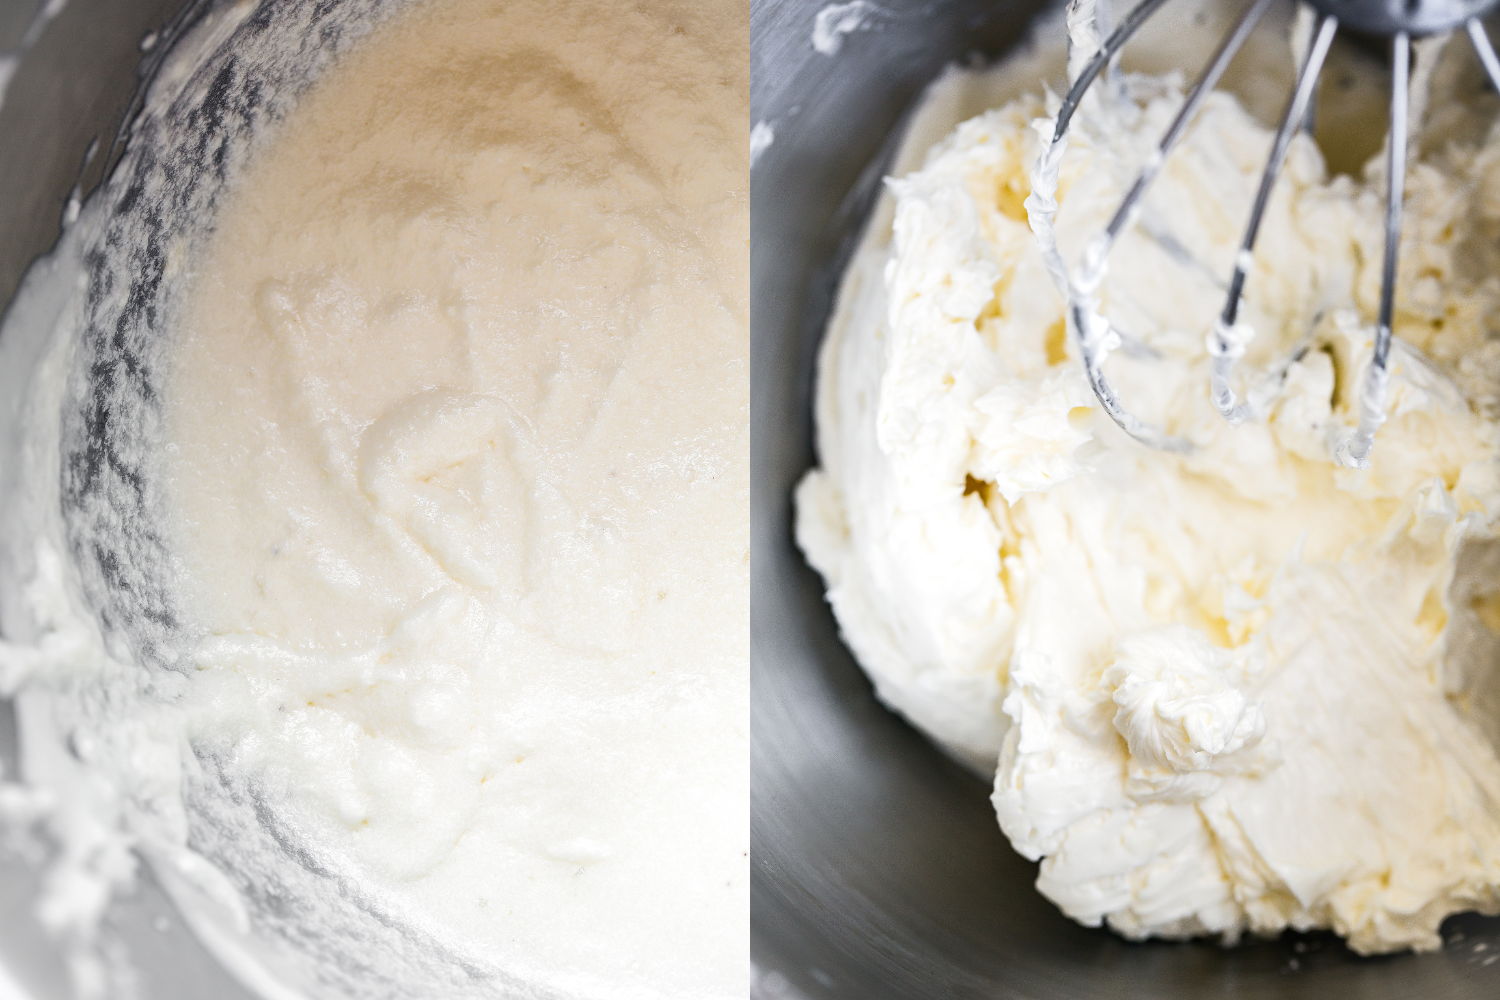 two side-by-side images, one showing the buttercream looking slightly curdled, and the other of perfectly creamy, smooth buttercream after continuing to mix for a bit longer.